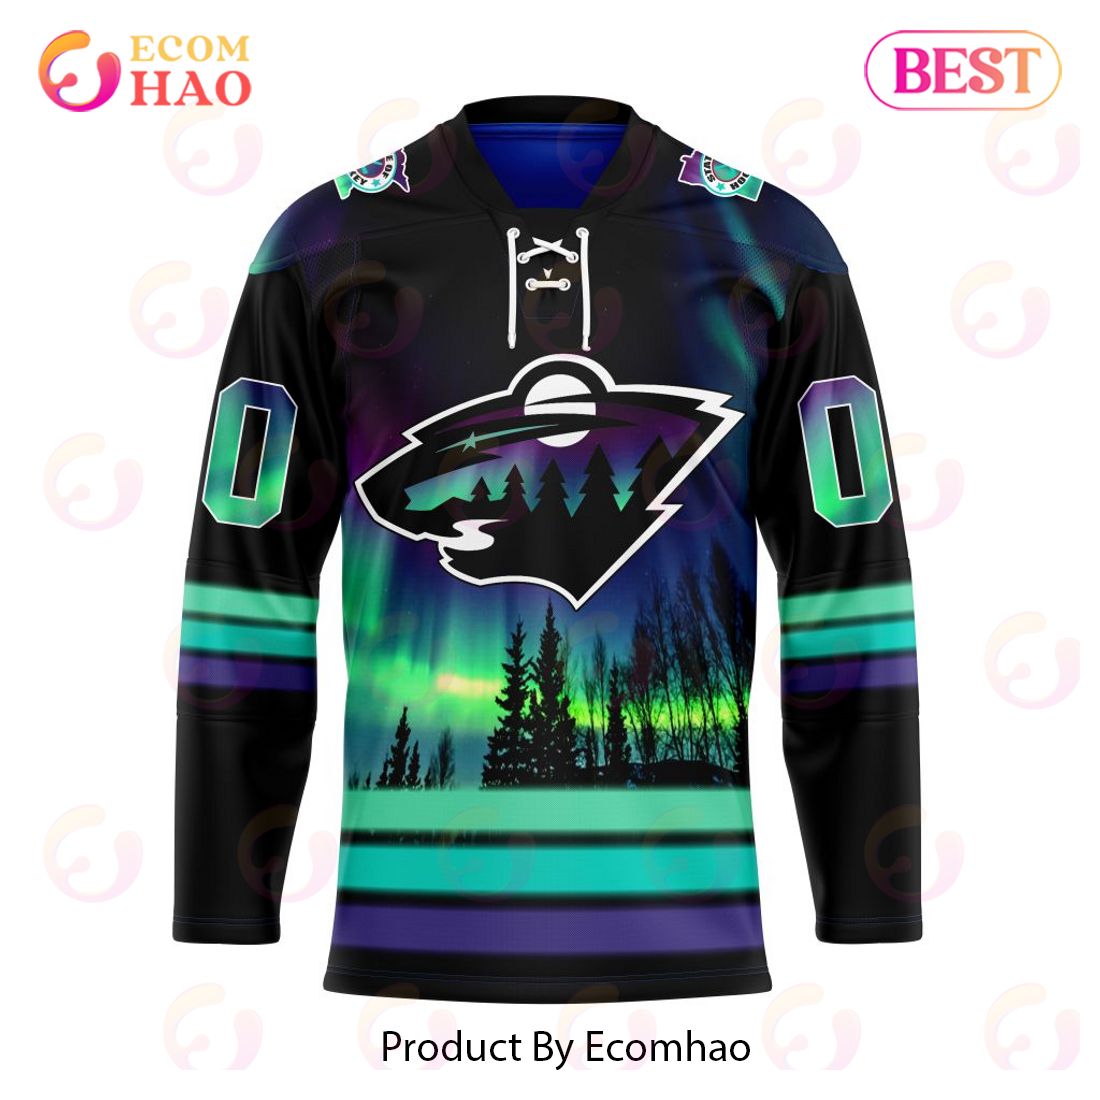 The best selling] NHL Minnesota Wild Special Pink Tie-Dye Full Printing  Shirt